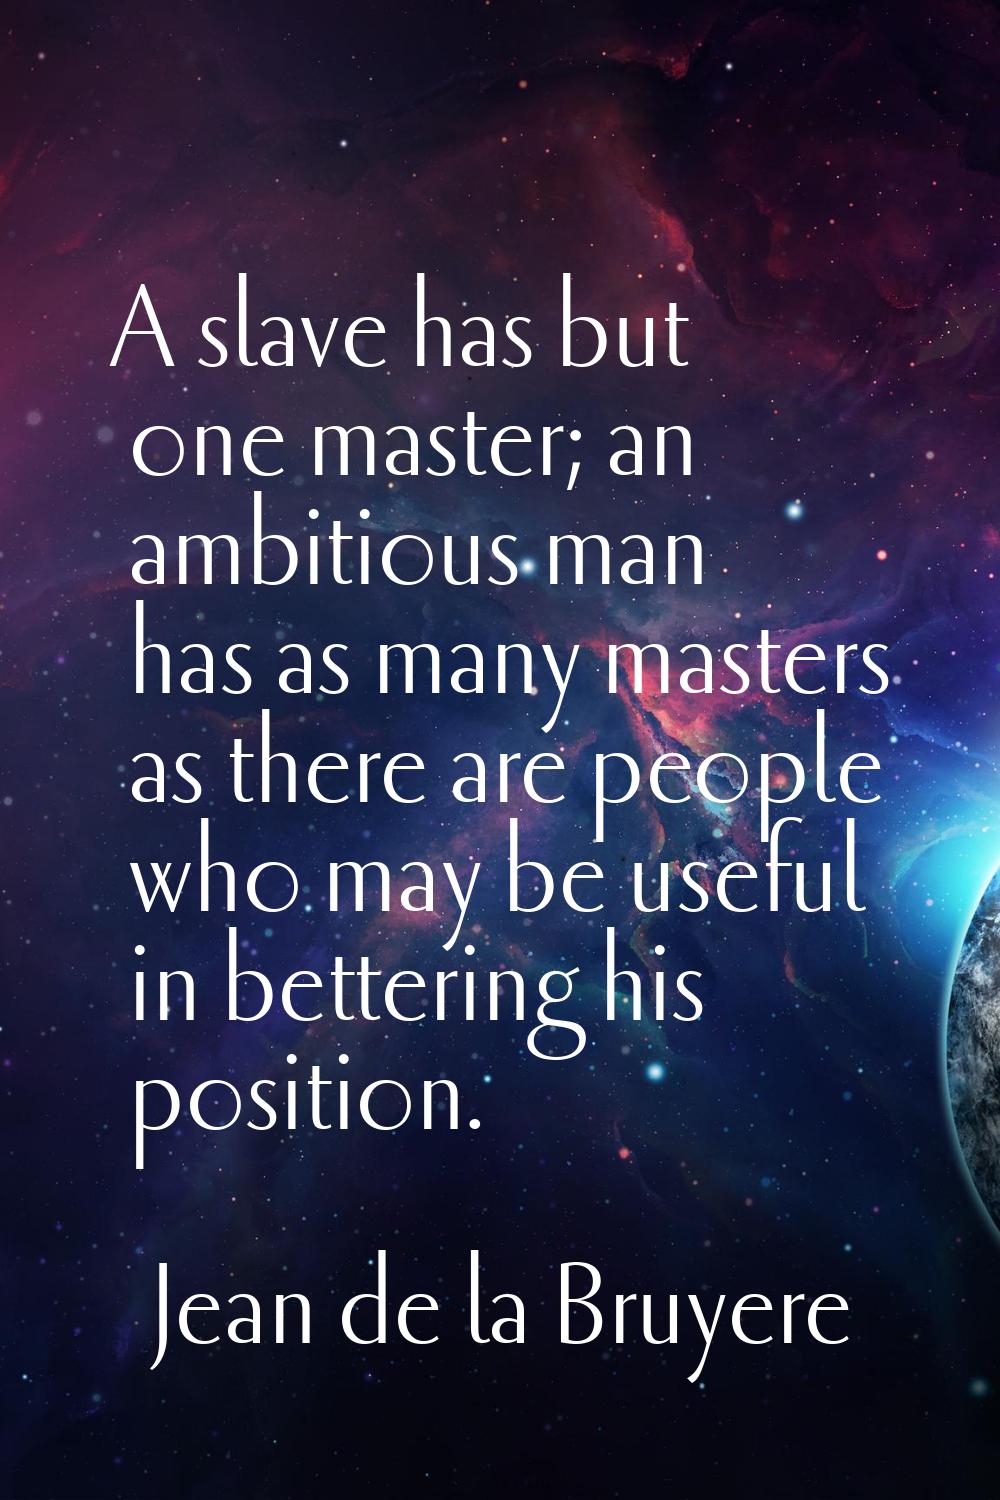 A slave has but one master; an ambitious man has as many masters as there are people who may be use